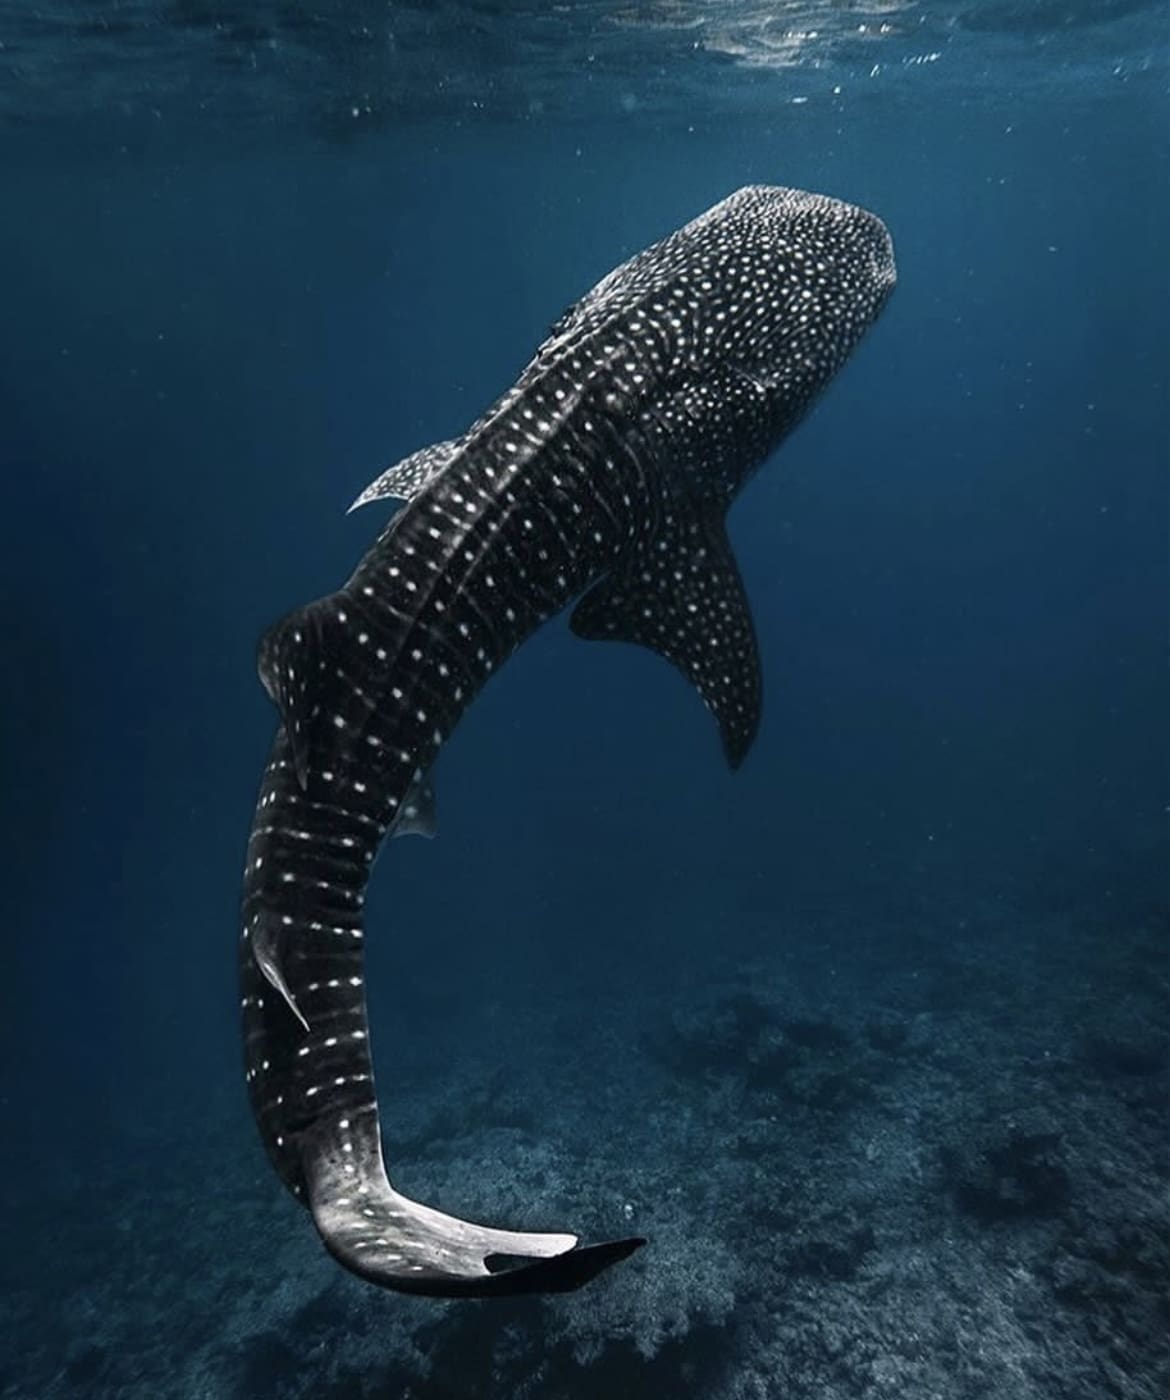 Whale shark in the Maldives